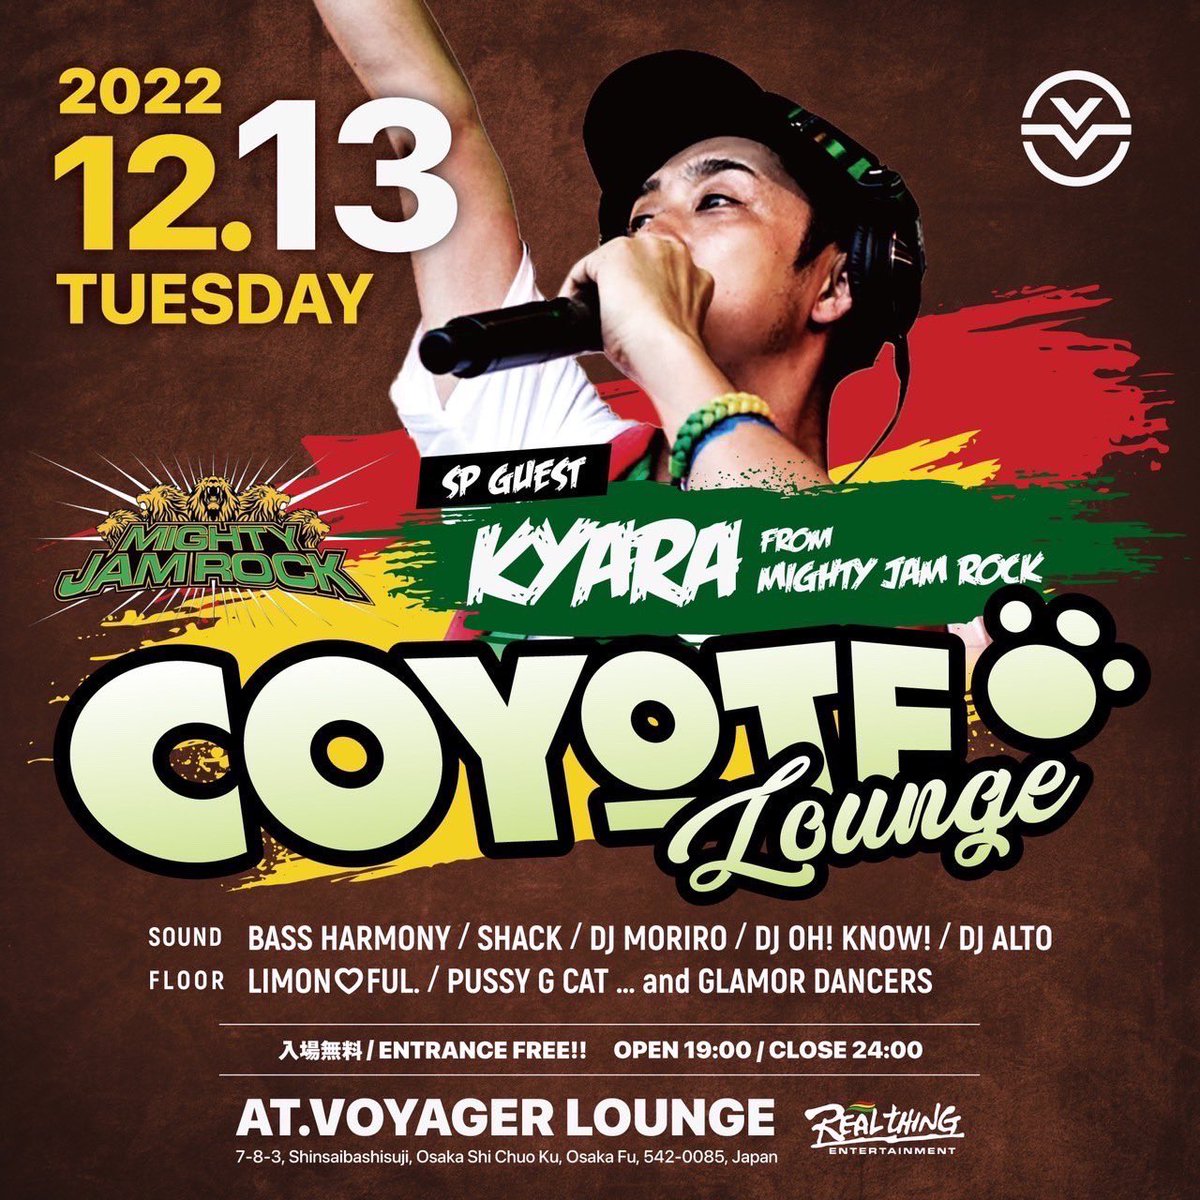 ma⭐︎milion出演

【COYOTE LOUNGE】

12/13 (Tue) 
【SP GUEST】KYARA from MIGHTY JAM ROCK
【Sound】BASSHARMONY / SHACK /DJ MORIRO / DJ OH! KNOW! /DJ ALTO…
【FLOOR】LIMON♡FUL. / PUSSY G CAT / KAOR! ..and GLAMOR DANCERS 

OPEN:19:00
CLOSE:00:00
ADM:入場無料

AT:VOYAGER LOUNGE